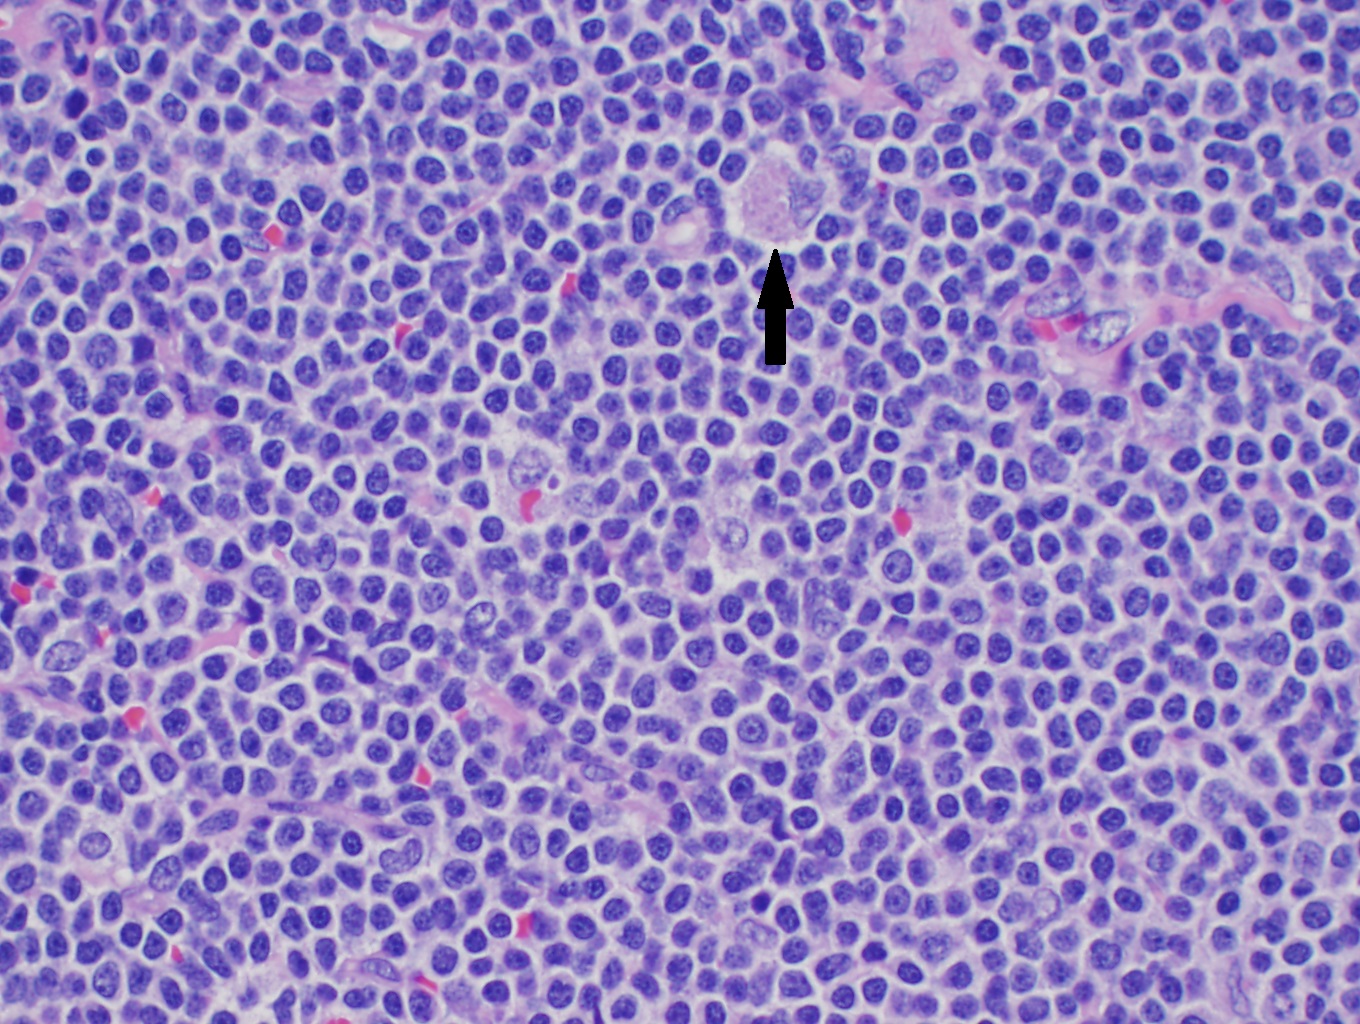 High power H&E of mantle cell lymphoma showing monotonous mature lymphocytes with mildly irregular nuclei.  A pink histocyte is highlighted by the black arrow. 